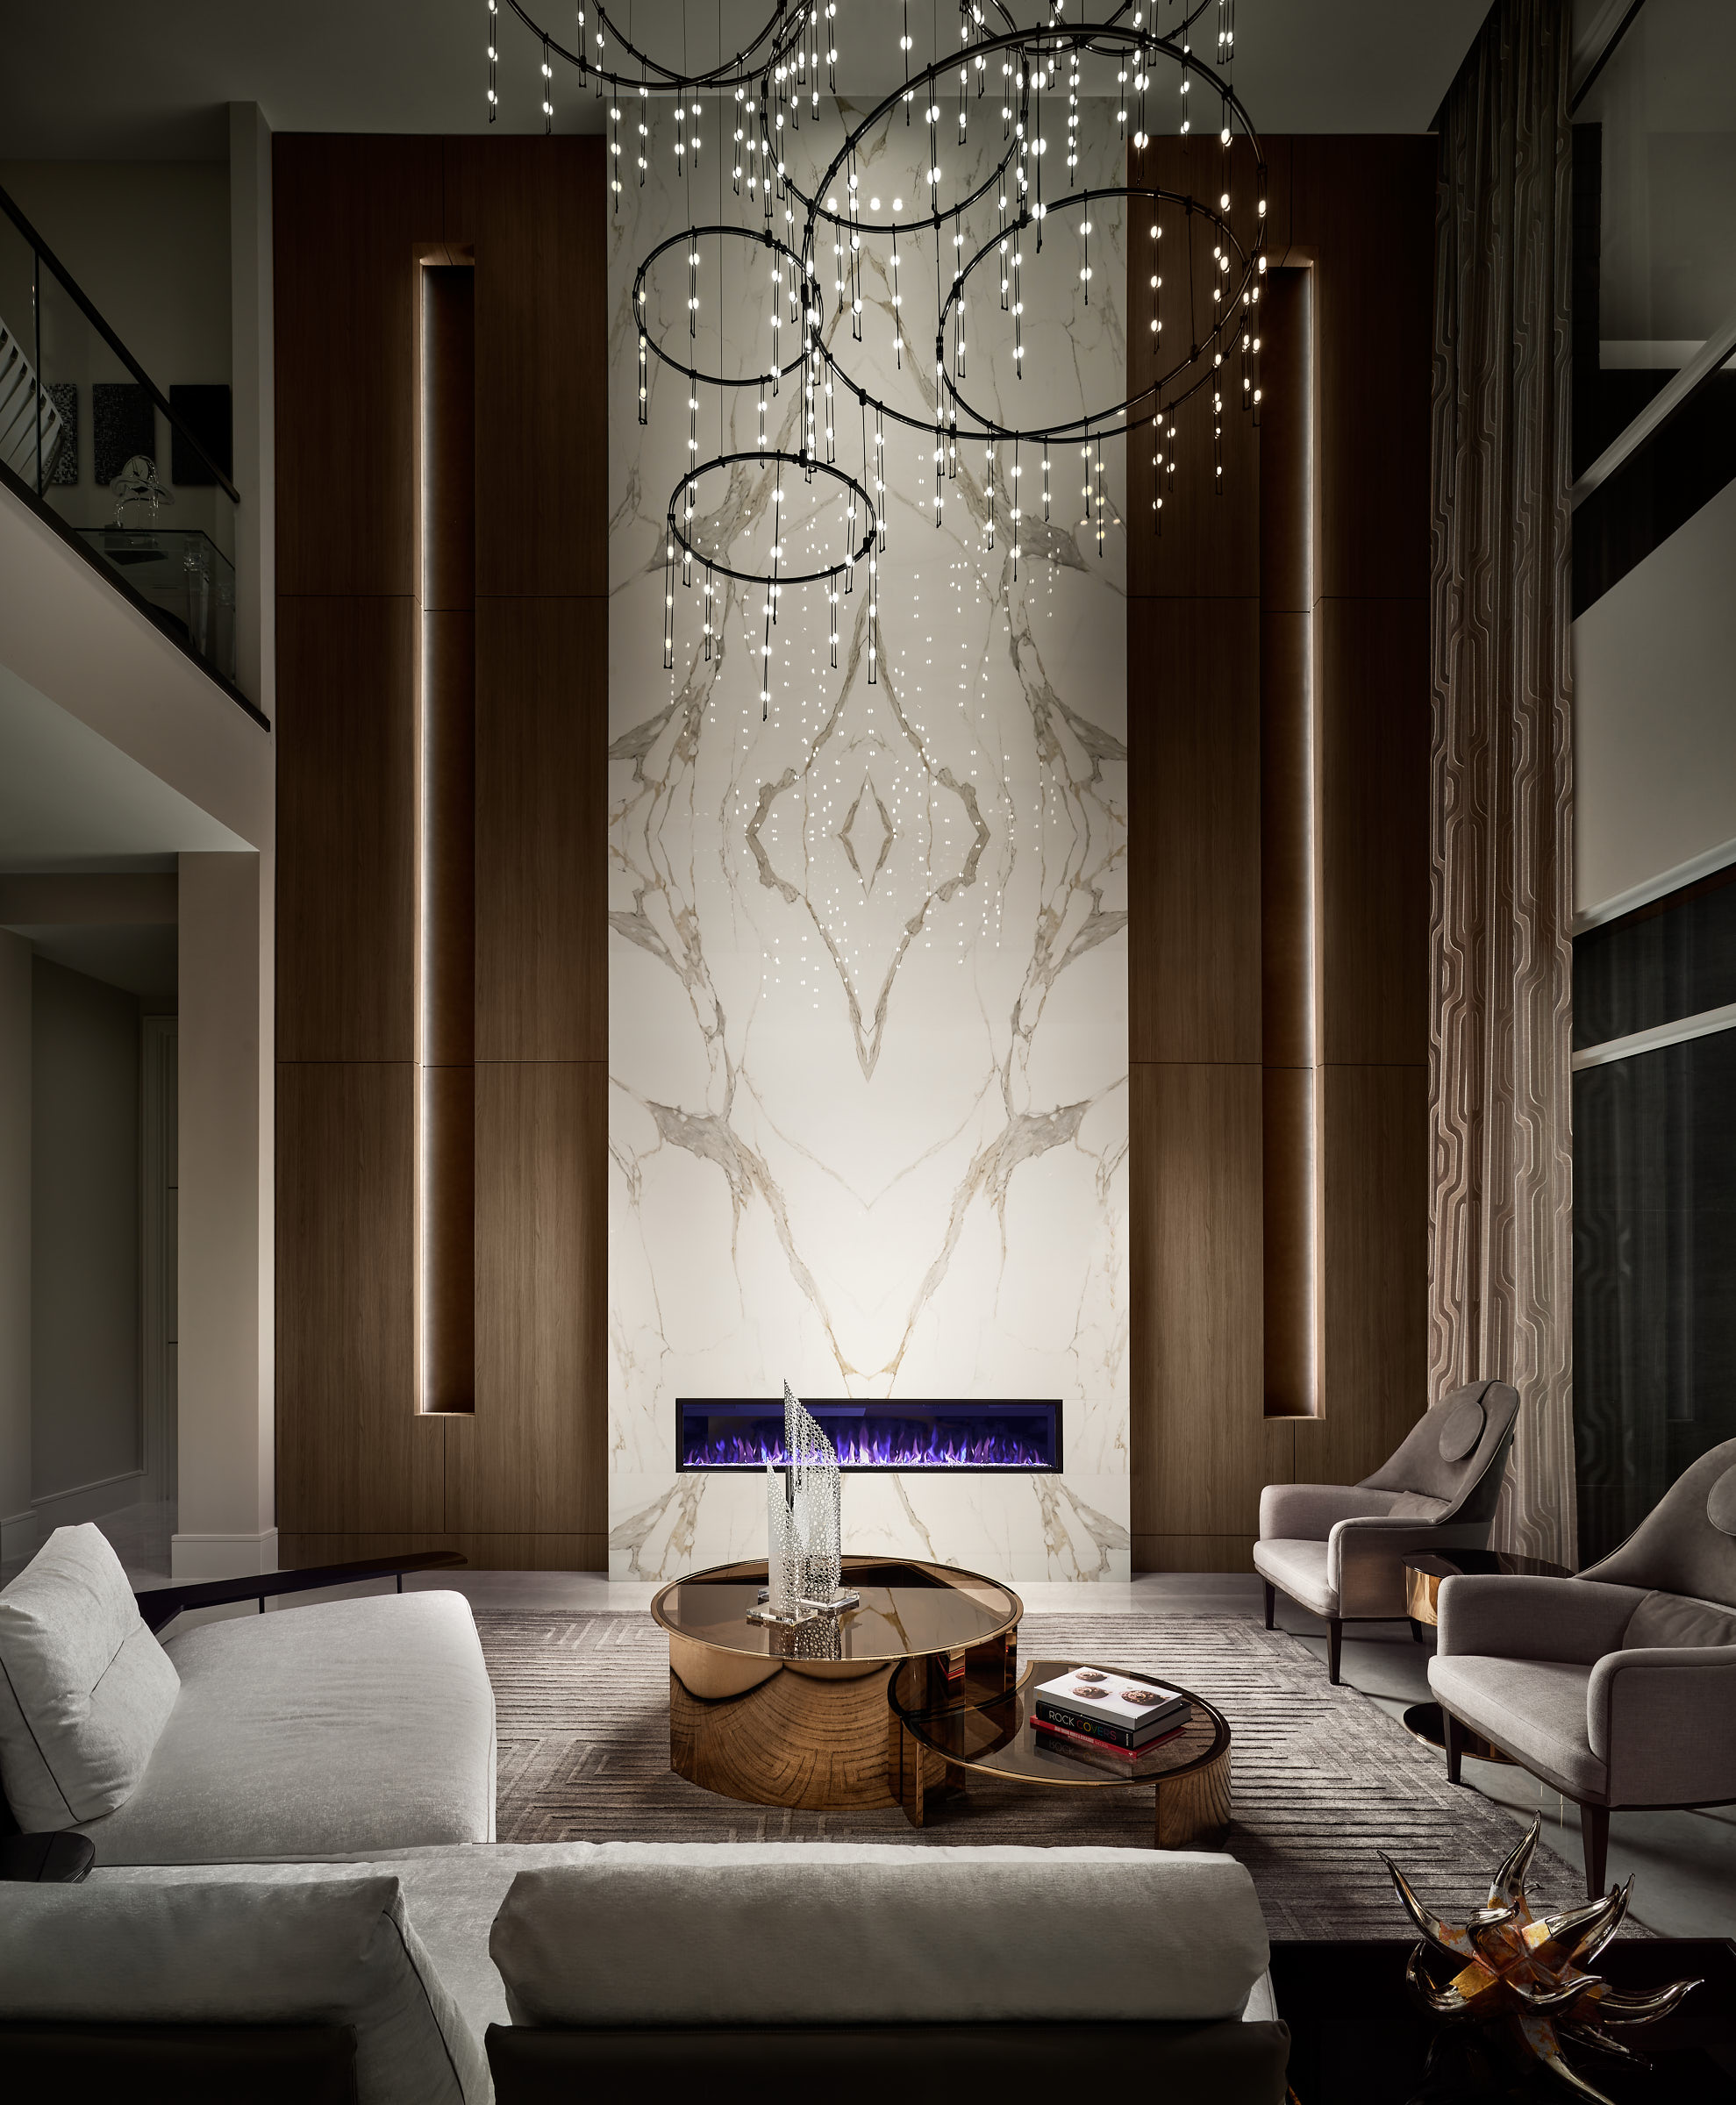 Interiors-by-Steven-G-Living-Fireplace-Calacatta-Marble